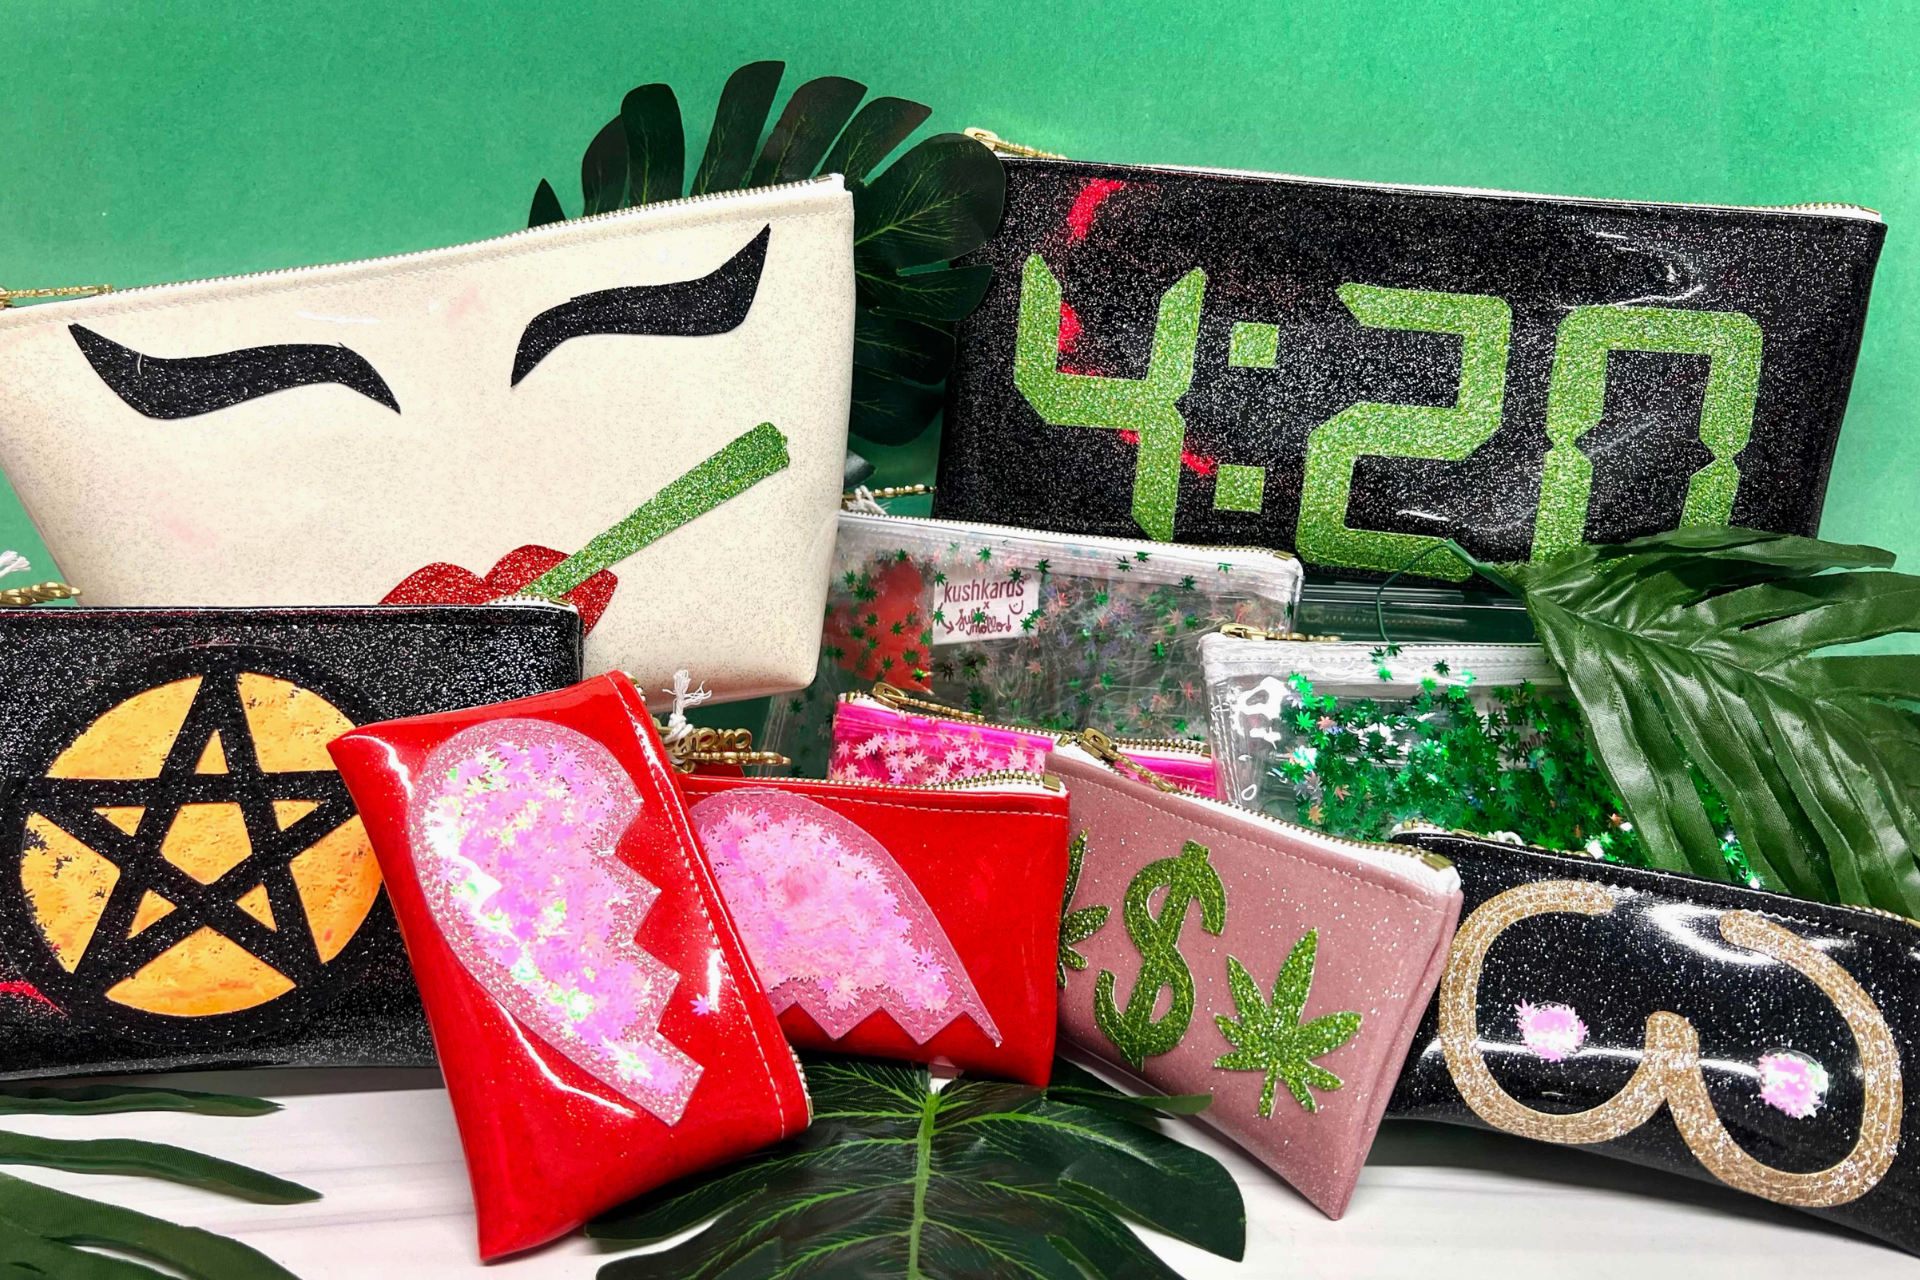 A collection of vibrant, themed clutch bags displayed against a green backdrop with tropical leaves. Designs include a pair of red lips with a joint, a black bag with a sparkly pentagram, a digital clock reading 4:20, and others with broken heart, dollar sign with cannabis leaf, and sparkly glasses motifs. The bags feature a glittery, eye-catching aesthetic, suggesting a fun and bold fashion statement.